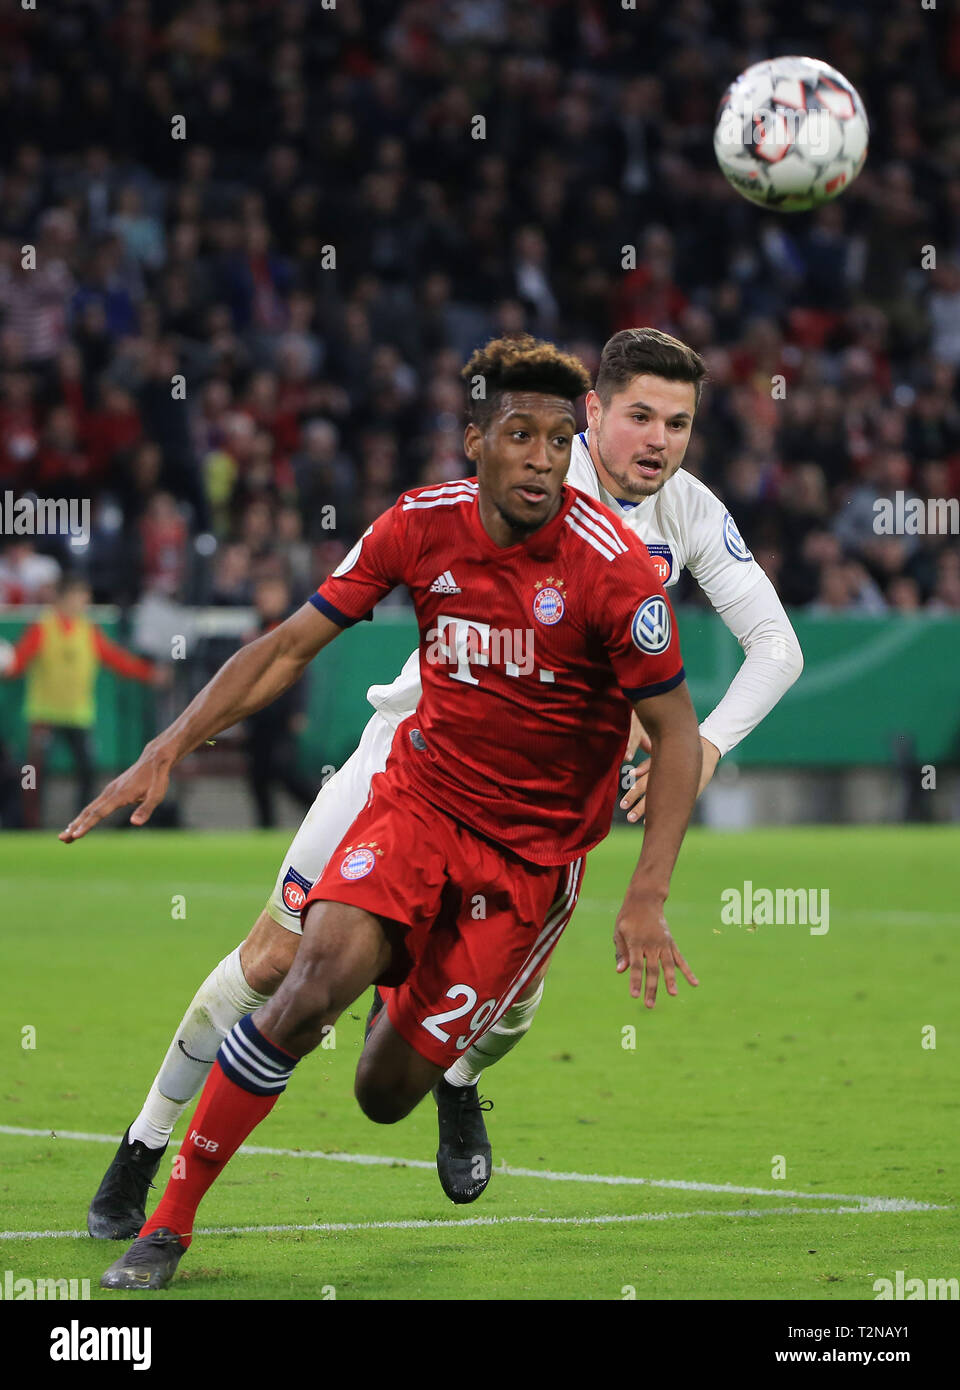 Munich, Germany. 3rd Apr, 2019. Bayern Munich's Kingsley Coman (F) vies with Heidenheim's Marnon Busch during the German Cup quarterfinal match between FC Bayern Munich and 1.FC Heidenheim 1846 in Munich, Germany, on April 3, 2019. Bayern Munich won 5-4 and advanced into the semifinals. Credit: Philippe Ruiz/Xinhua/Alamy Live News Stock Photo